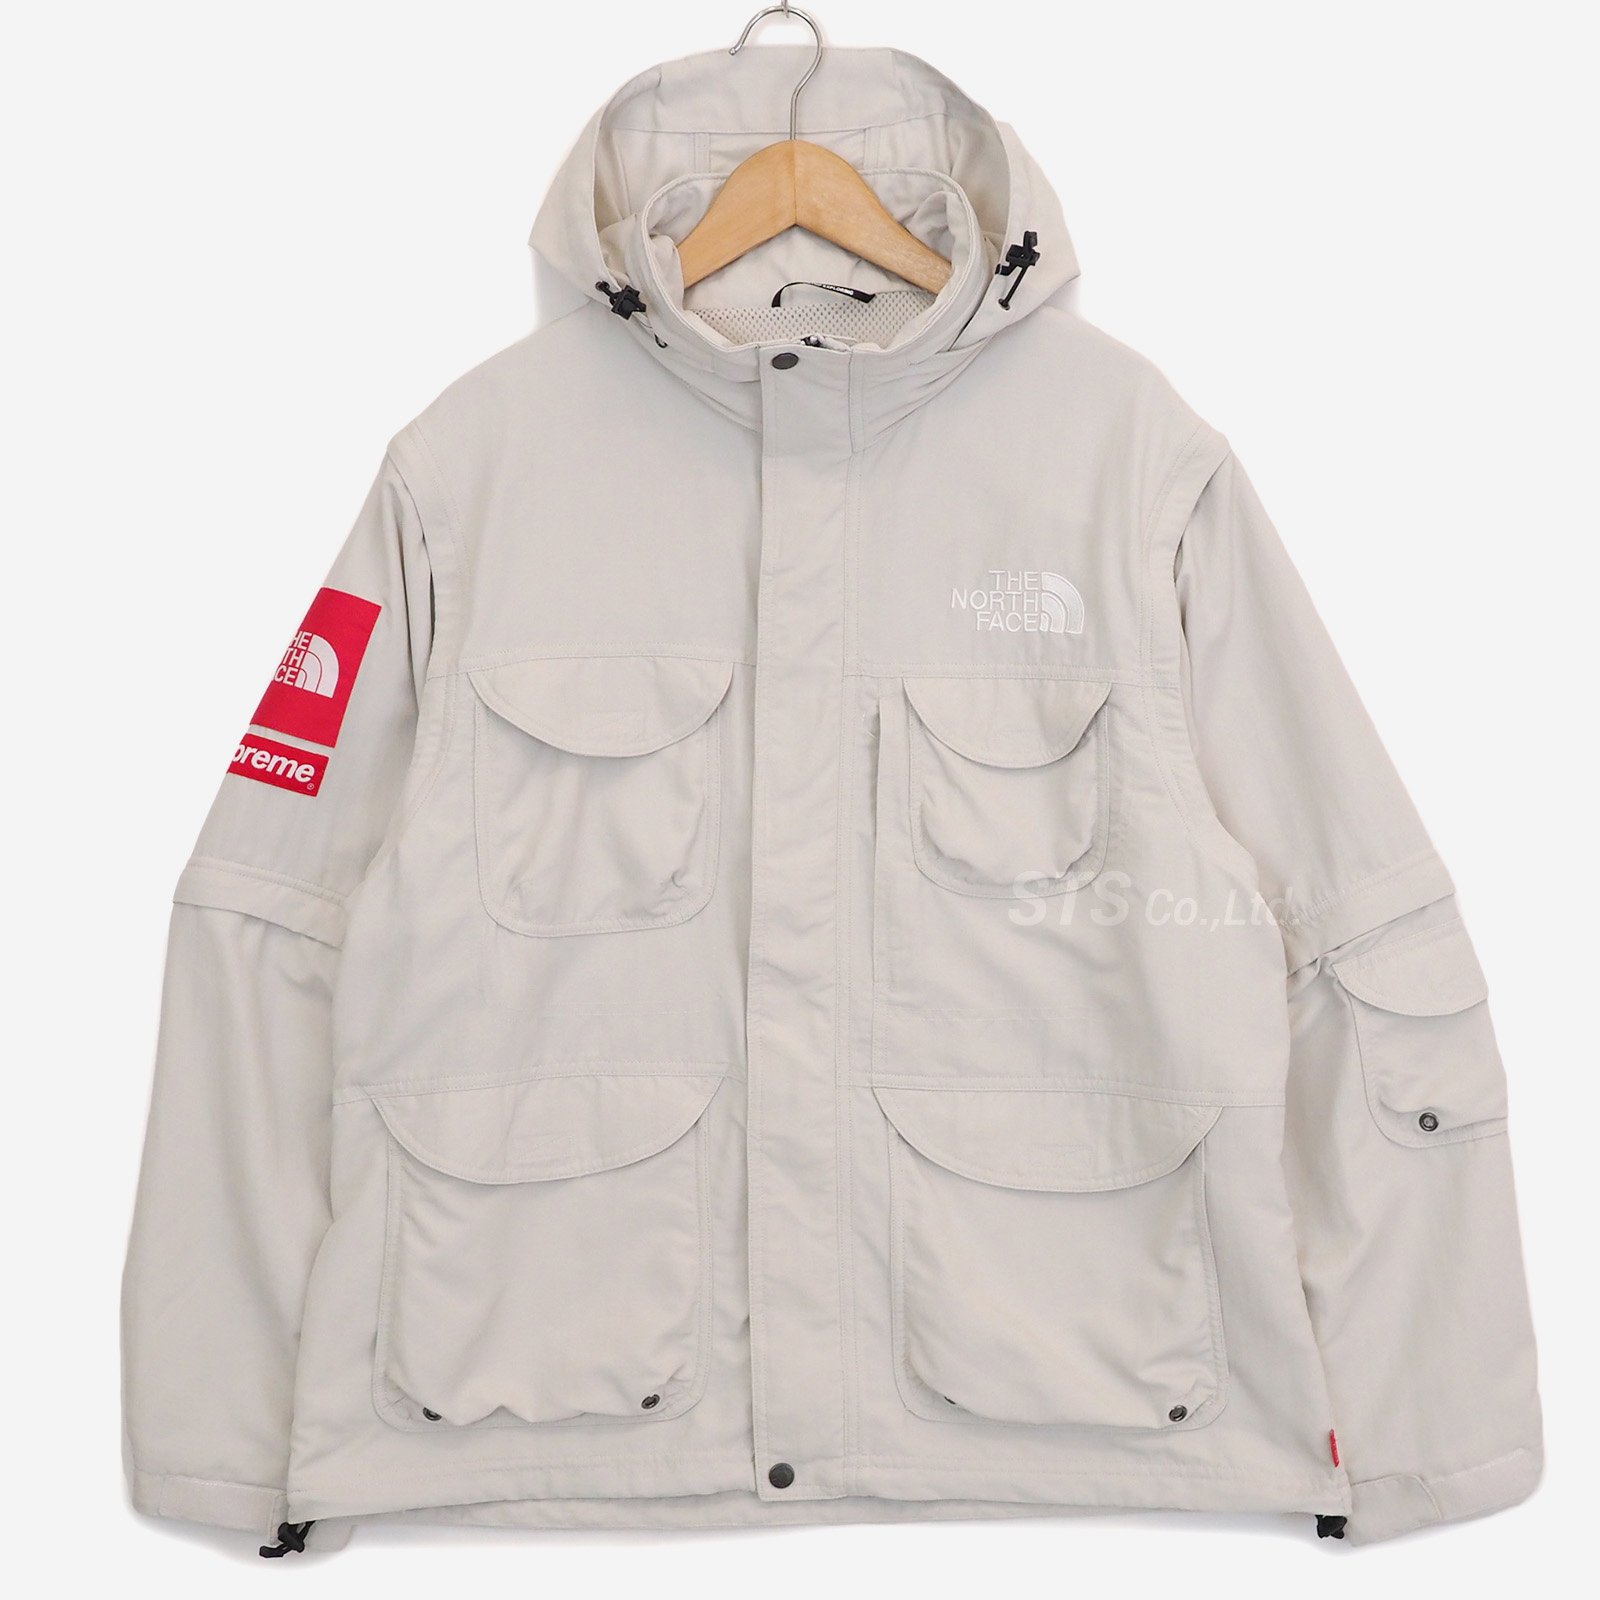 Supreme/The North Face Trekking Convertible Jacket - ParkSIDER